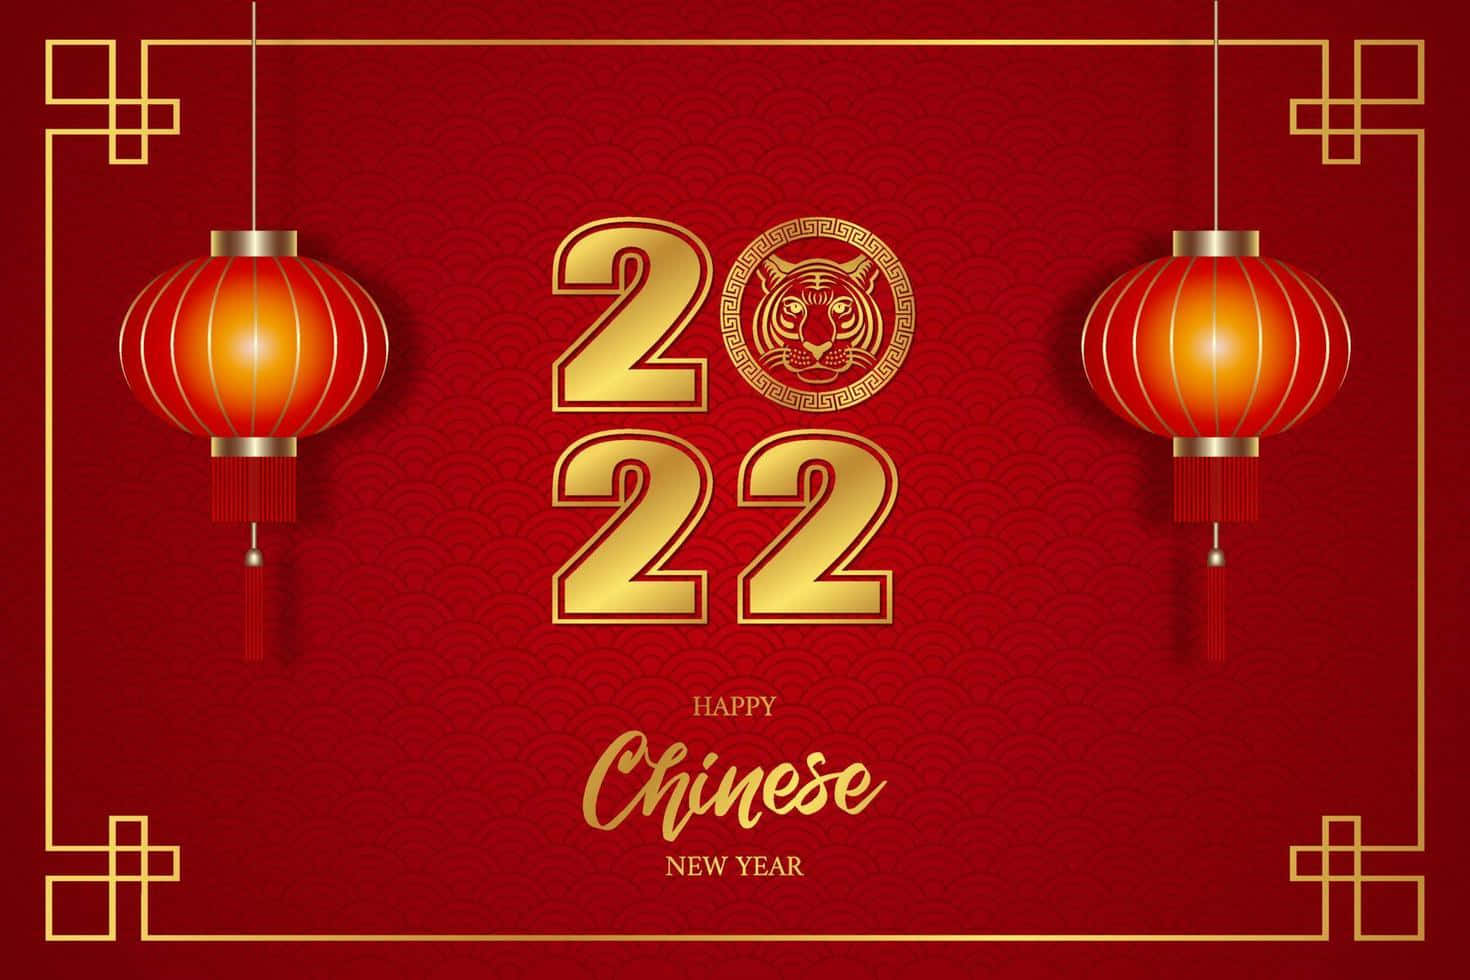 Chinese New Year 2020 With Golden Lanterns And Red Background